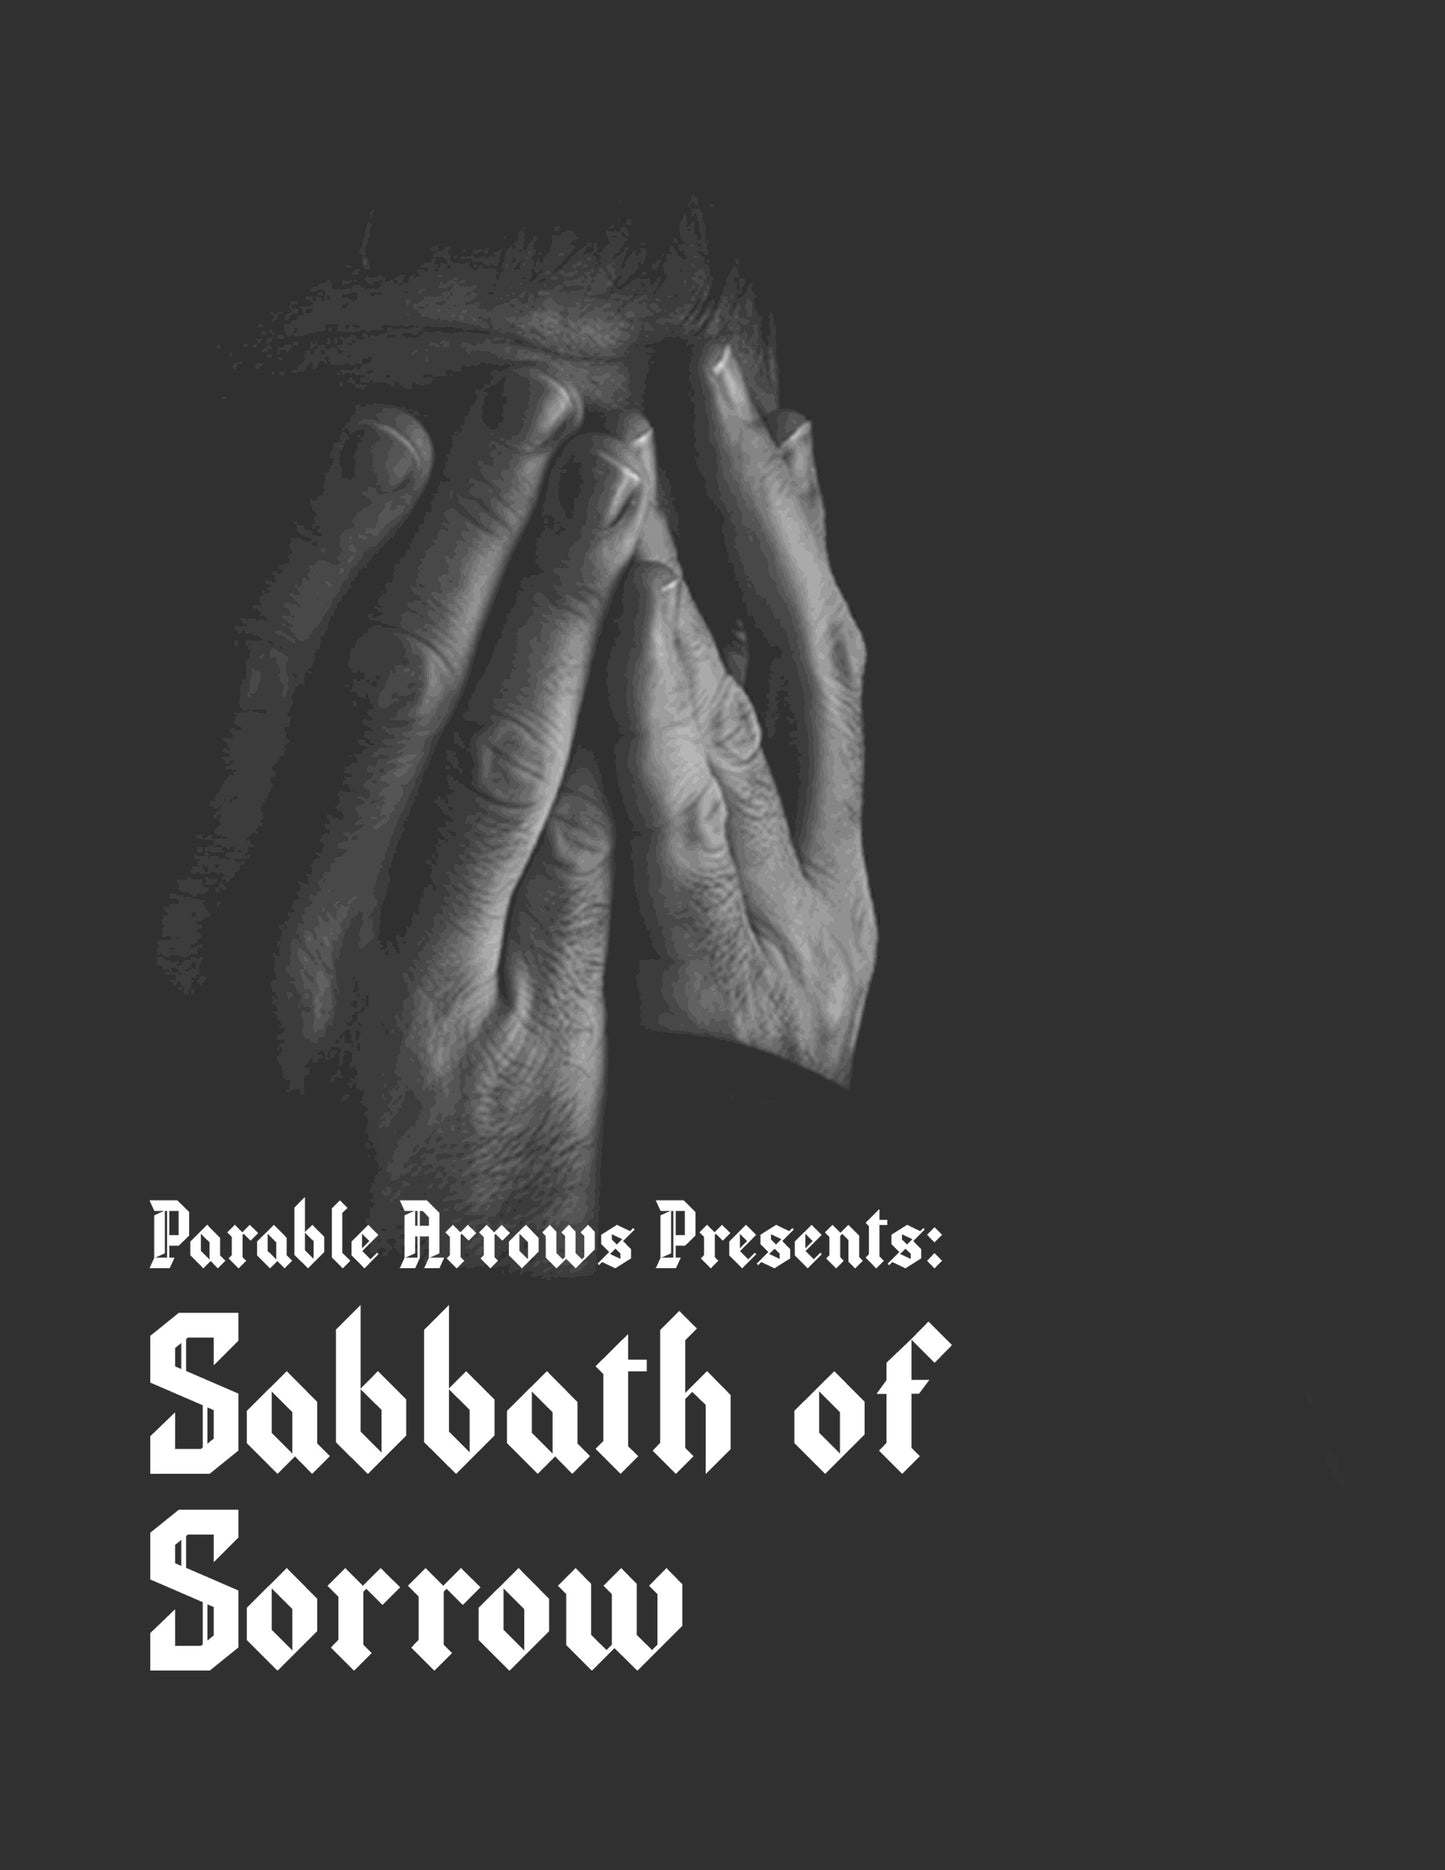 Sabbath of Sorrow - Watch and Self Reflection Guide